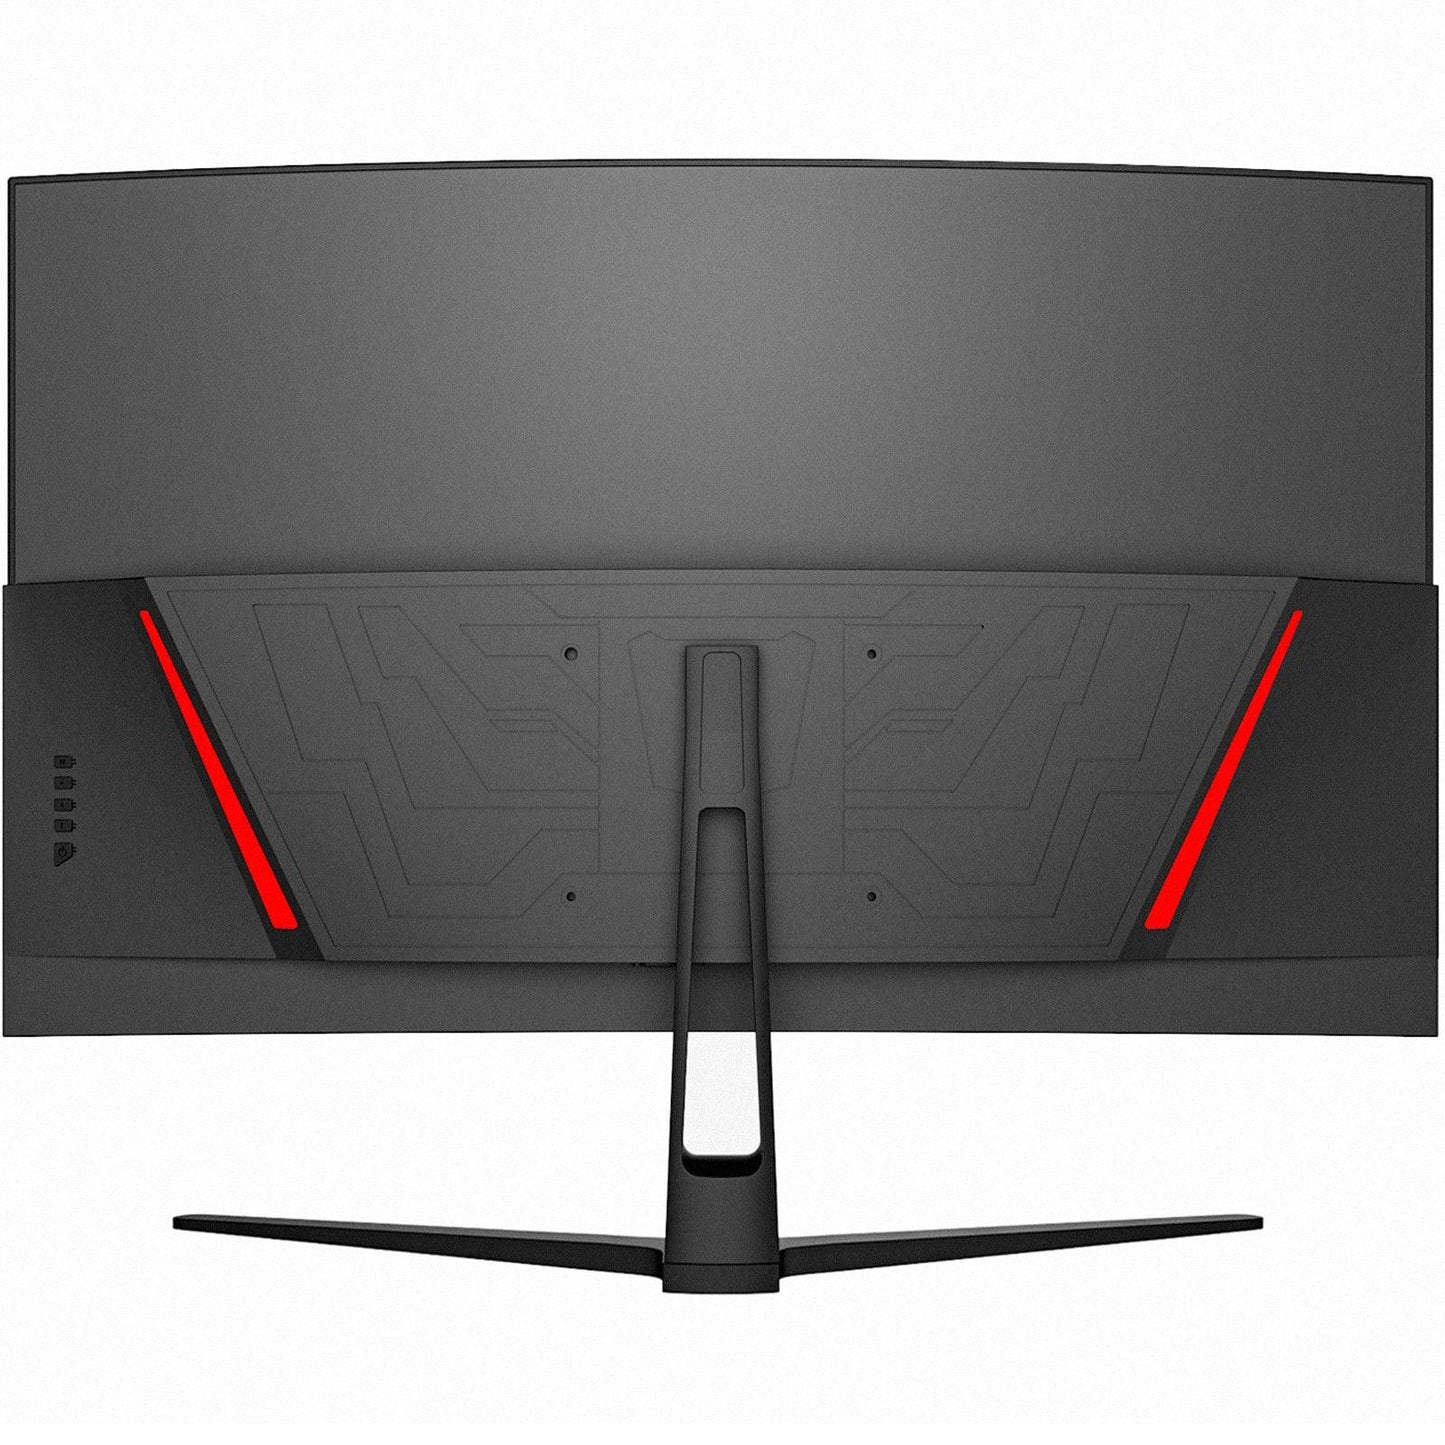 Load image into Gallery viewer, 32 inch 1080P 165Hz Curved Surface Gaming Monitor
